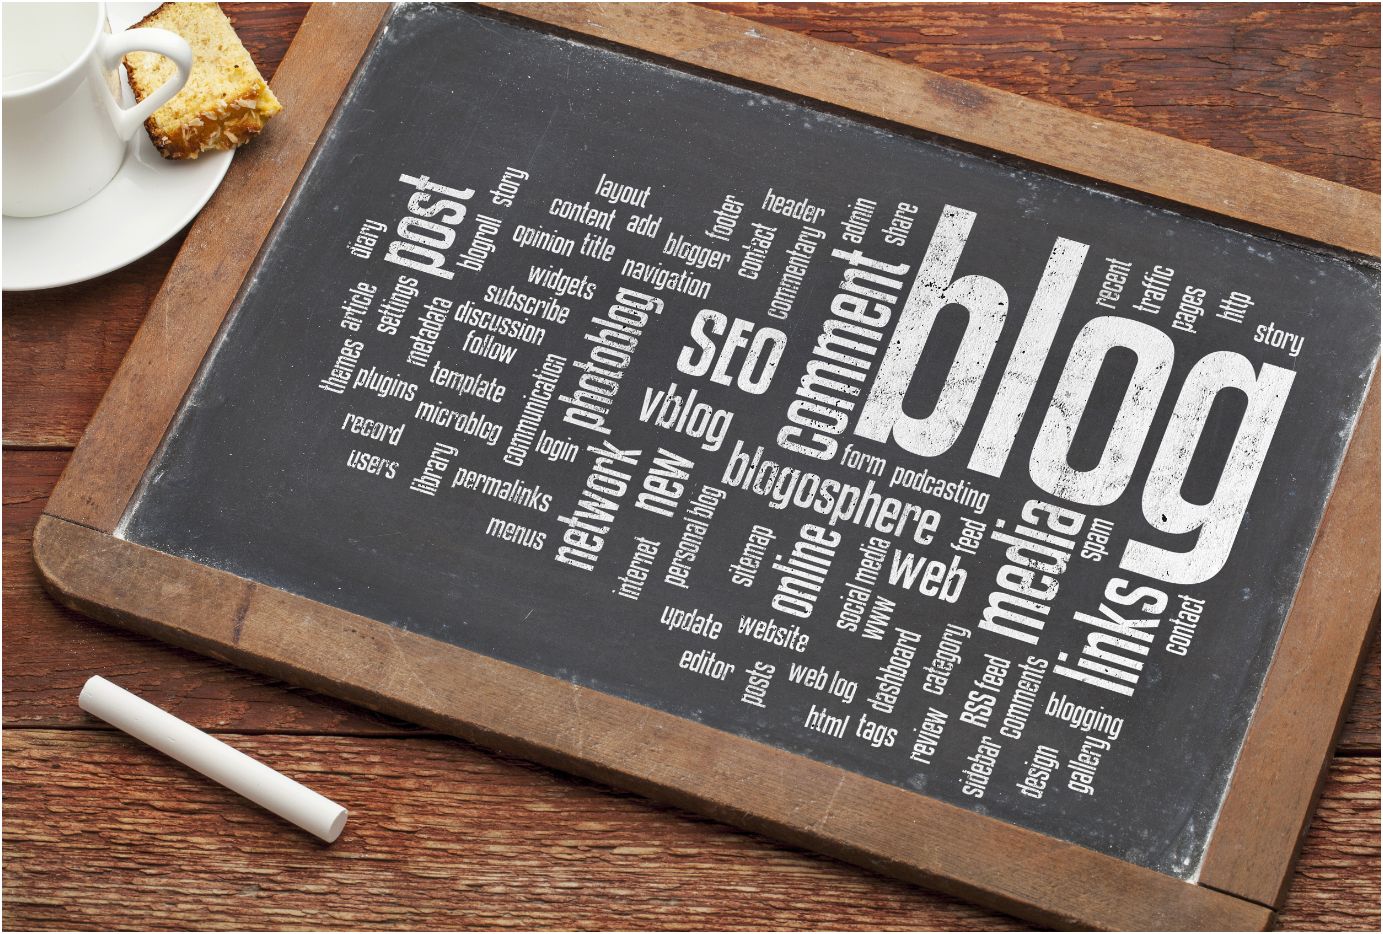 Blogging is an ongoing effort. Photo courtesy Shutterstock.